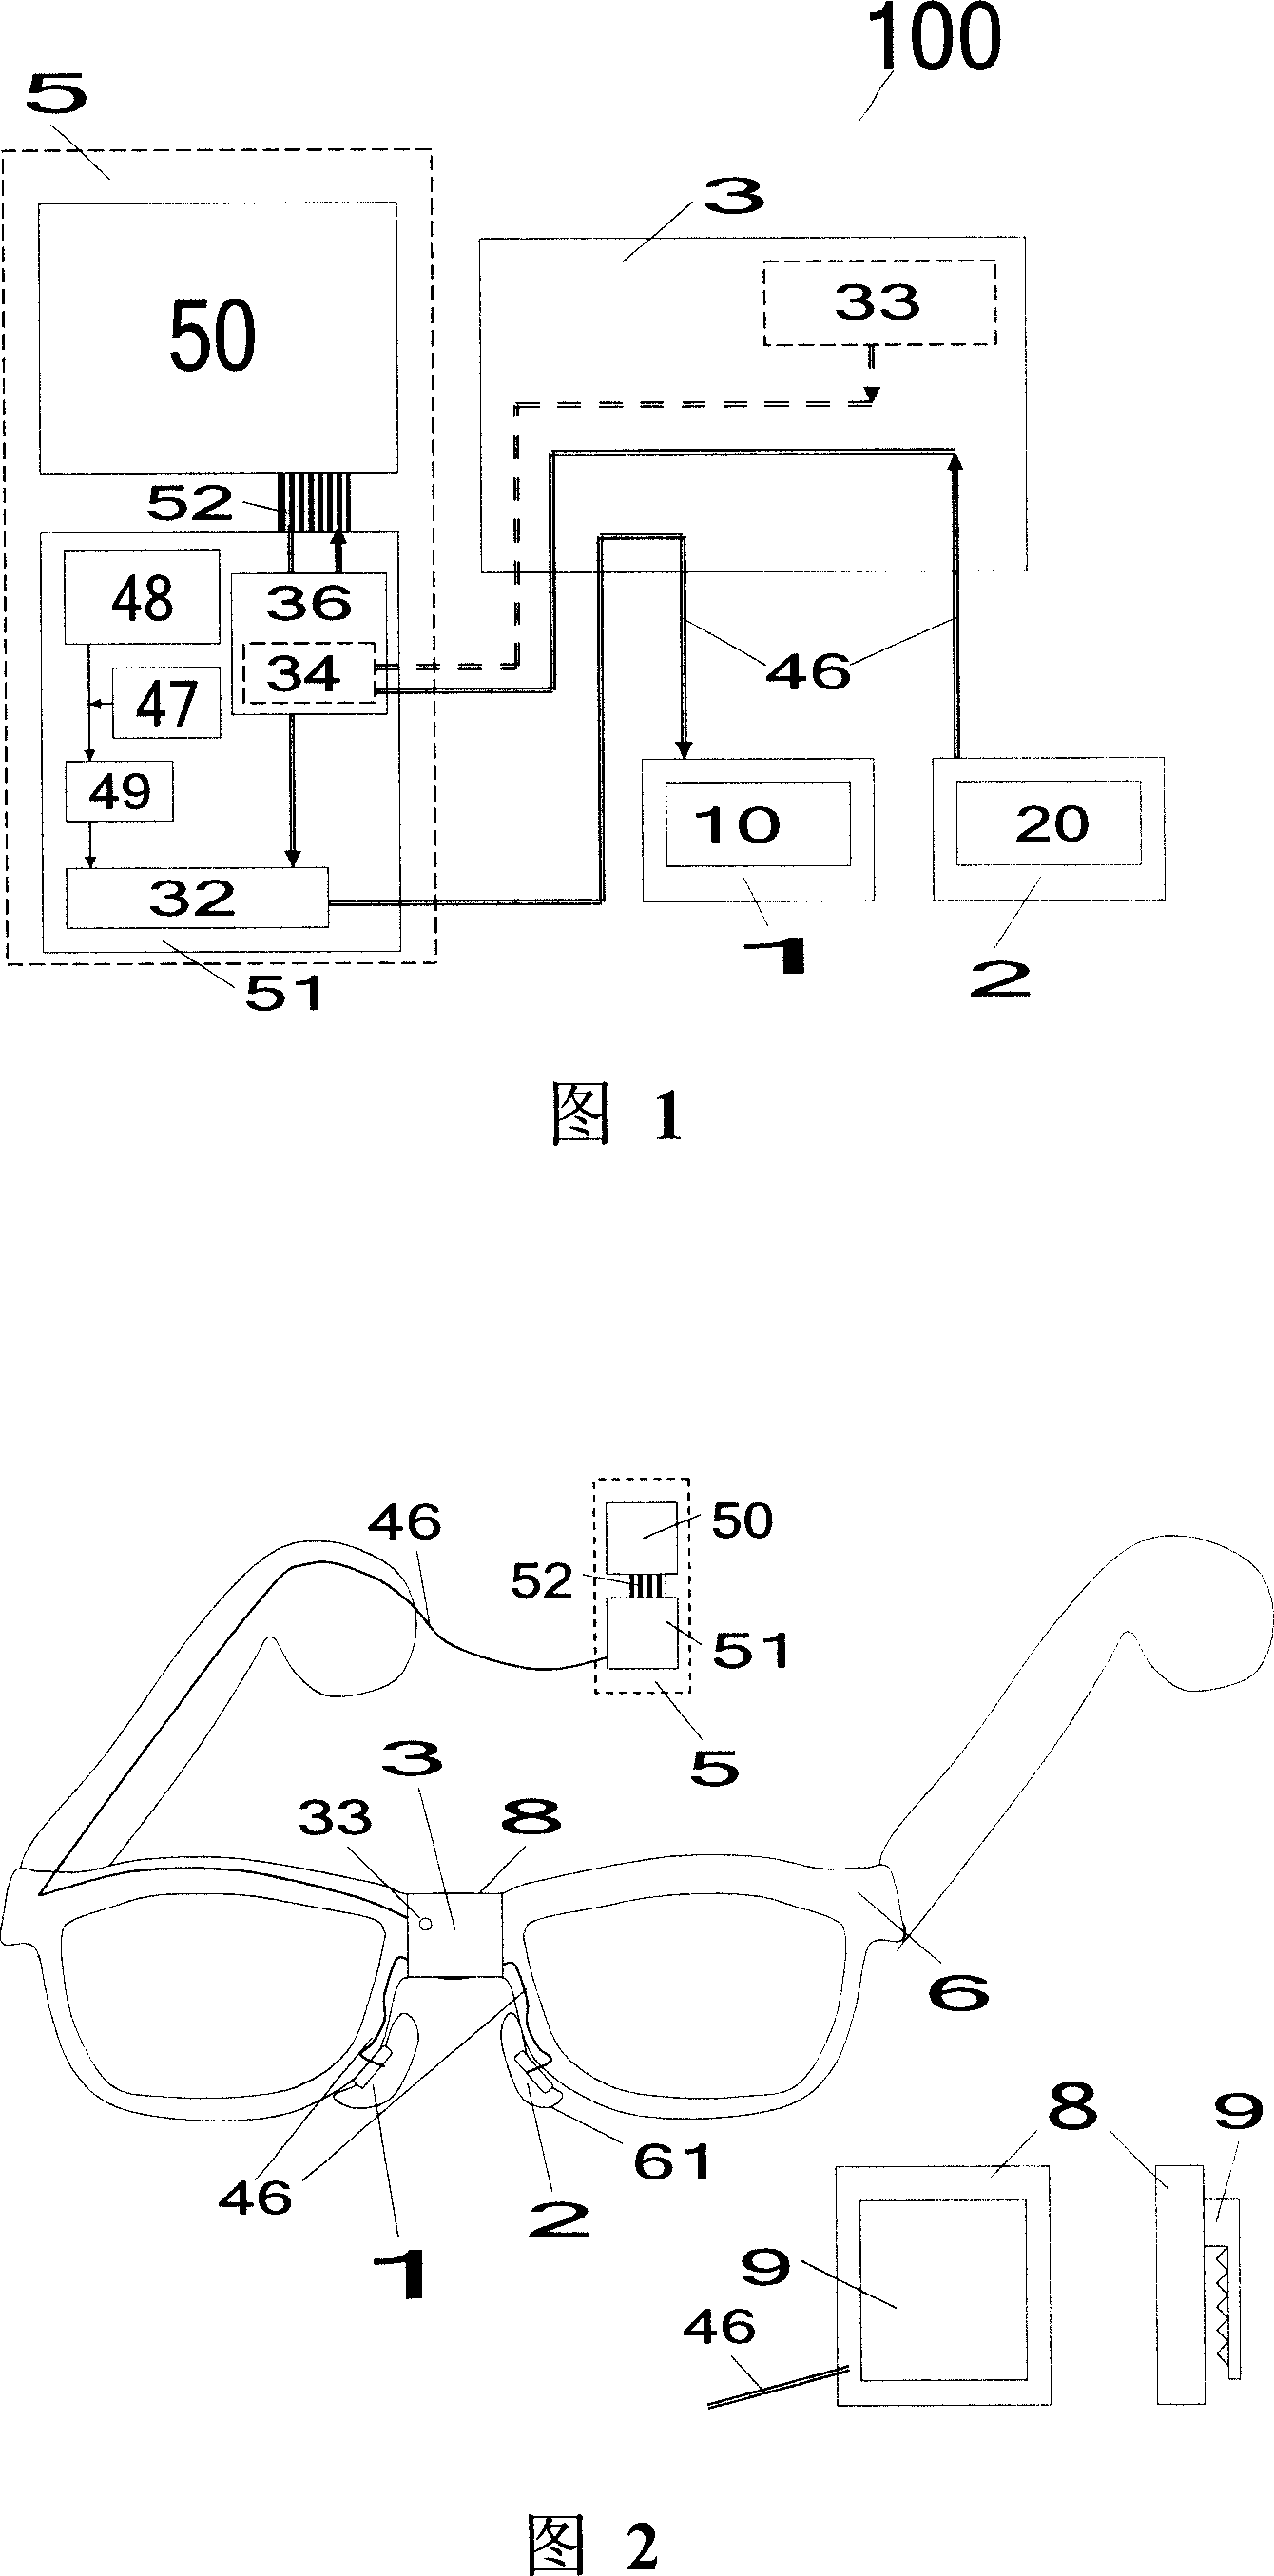 Nose bone conduction communication transfer and peripheral device